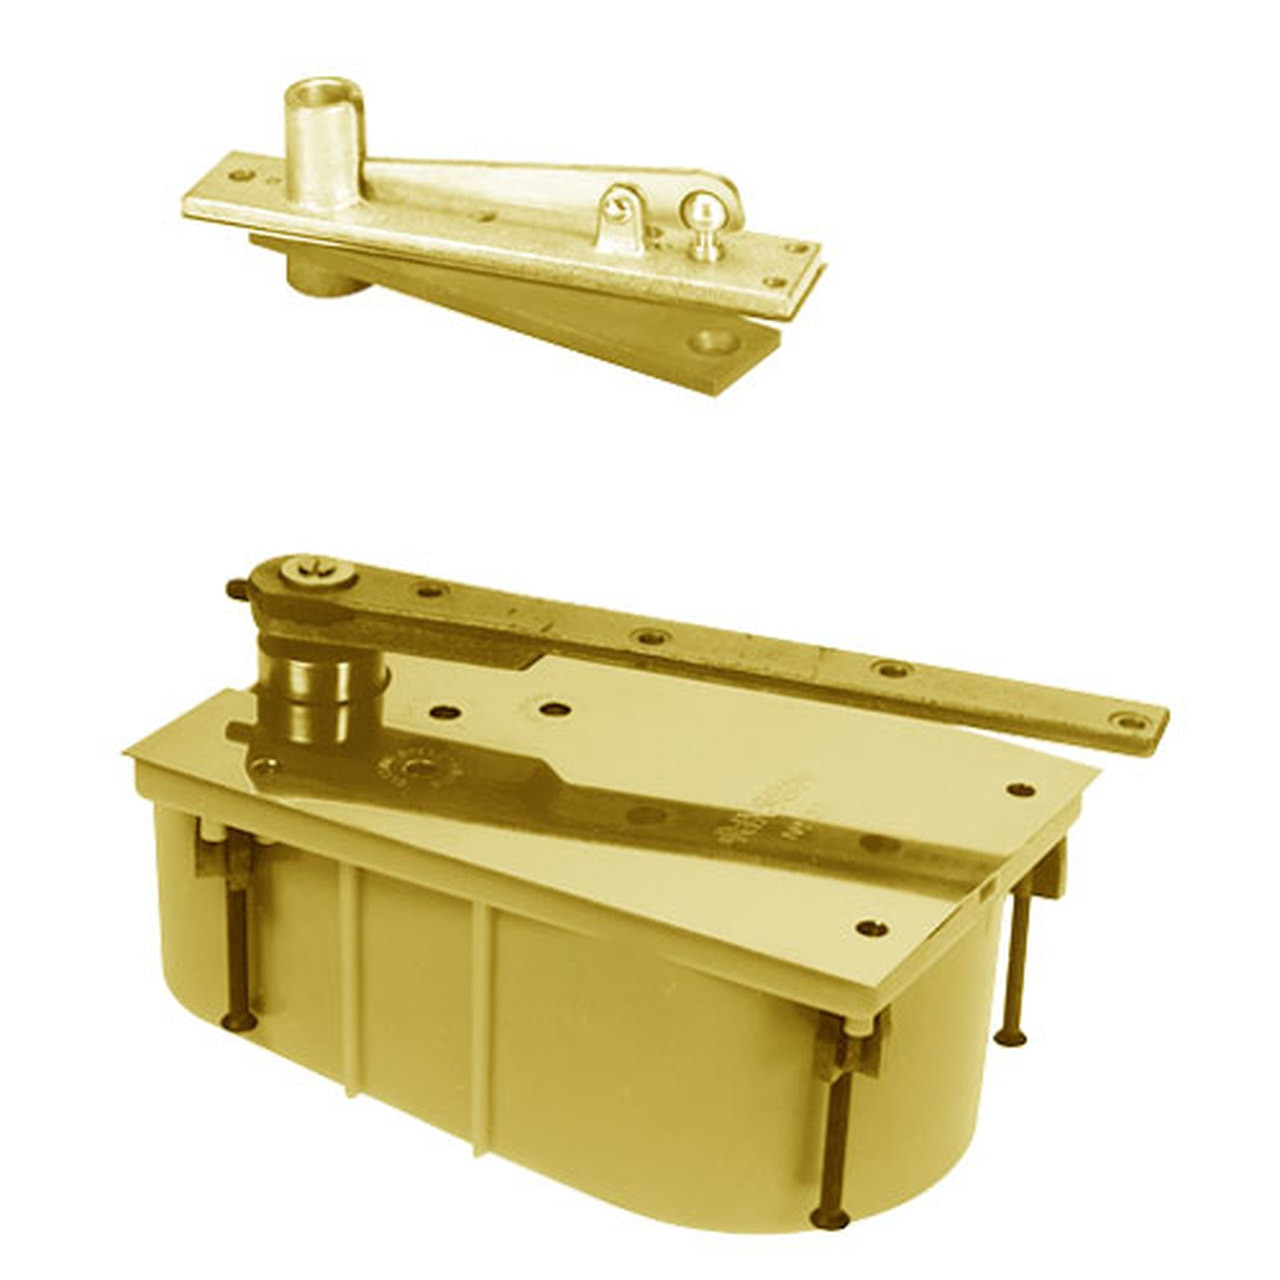 28-105S-554-LCC-LH-605 Rixson 28 Series Heavy Duty Single Acting Center Hung Floor Closer with Concealed Arm in Bright Brass Finish